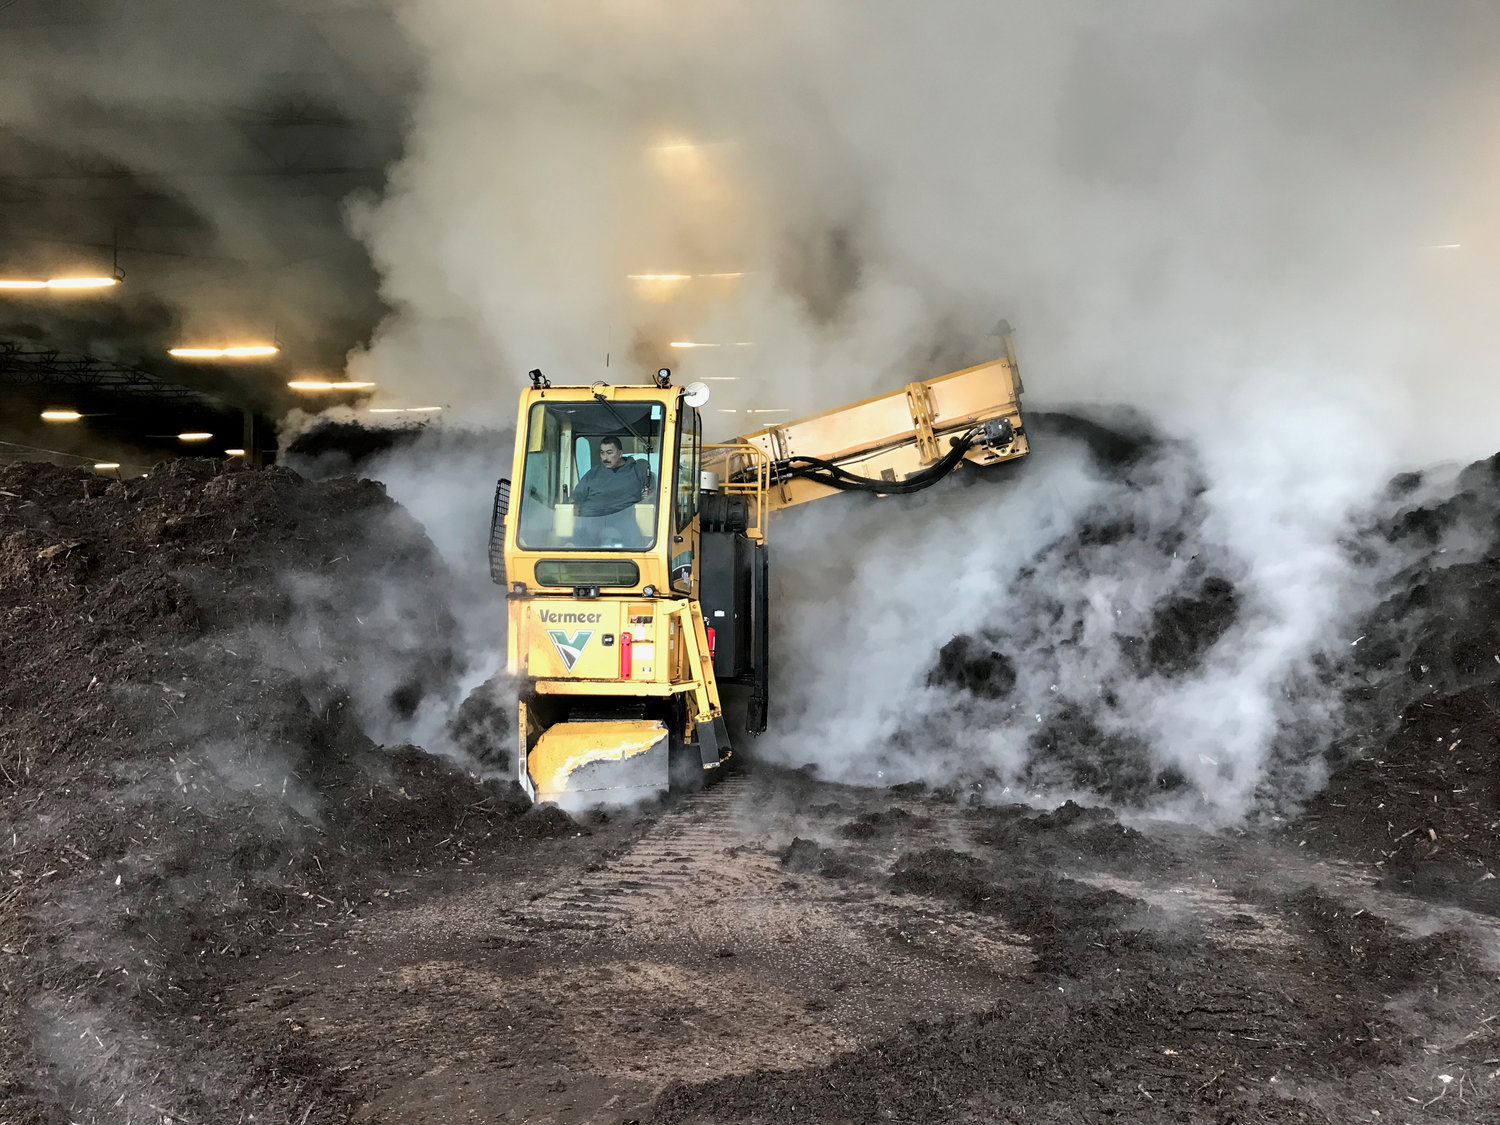 At Silver Springs Organics in Rainier, Armondo Lugo drives a machine that turns over giant steaming piles of compost.